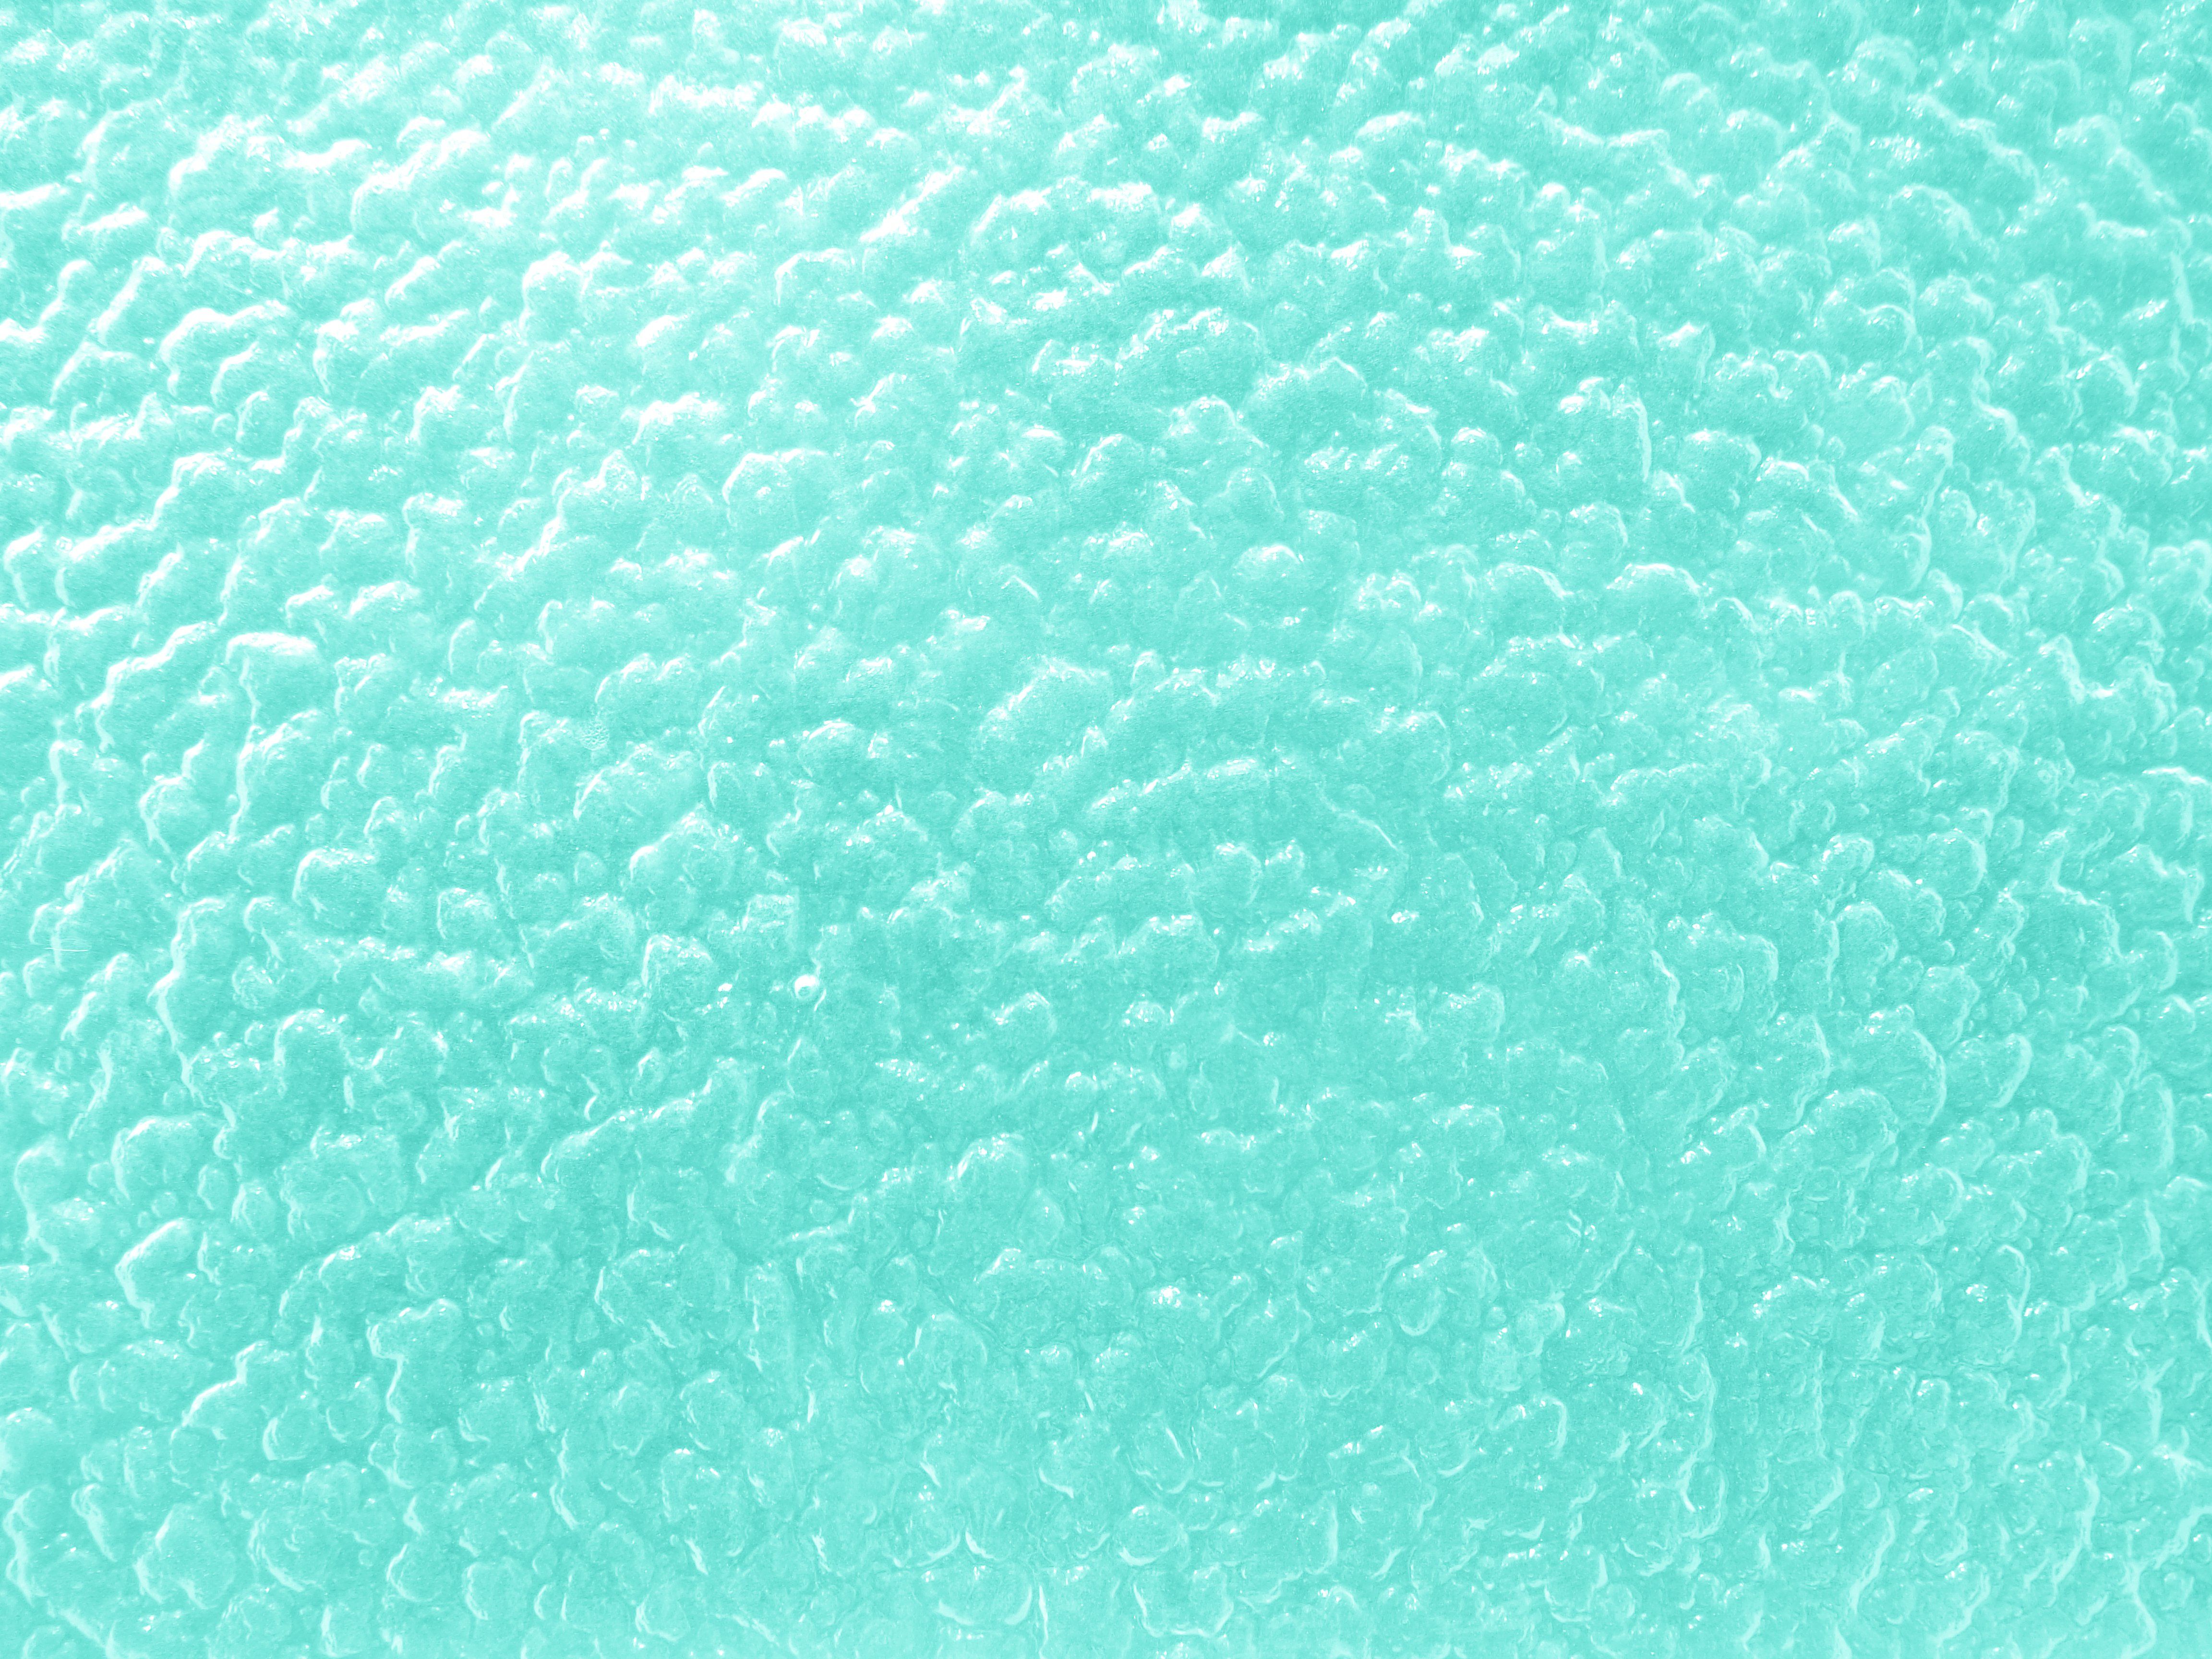 Turquoise Textured Glass with Bumpy Surface Picture. Free Photograph. Photo Public Domain